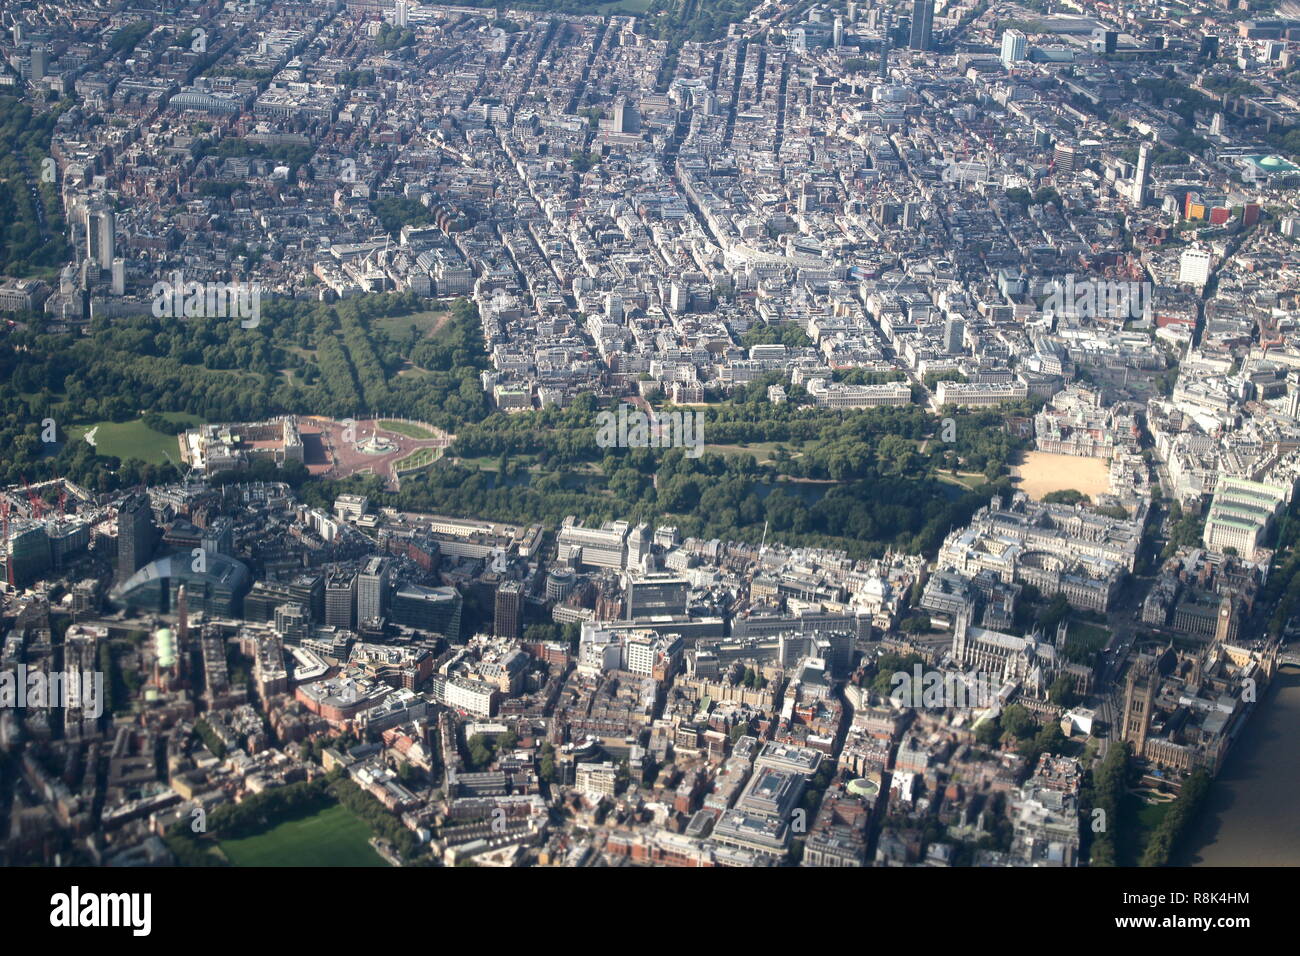 Aerial view of London featuring Buckingham Palace Stock Photo